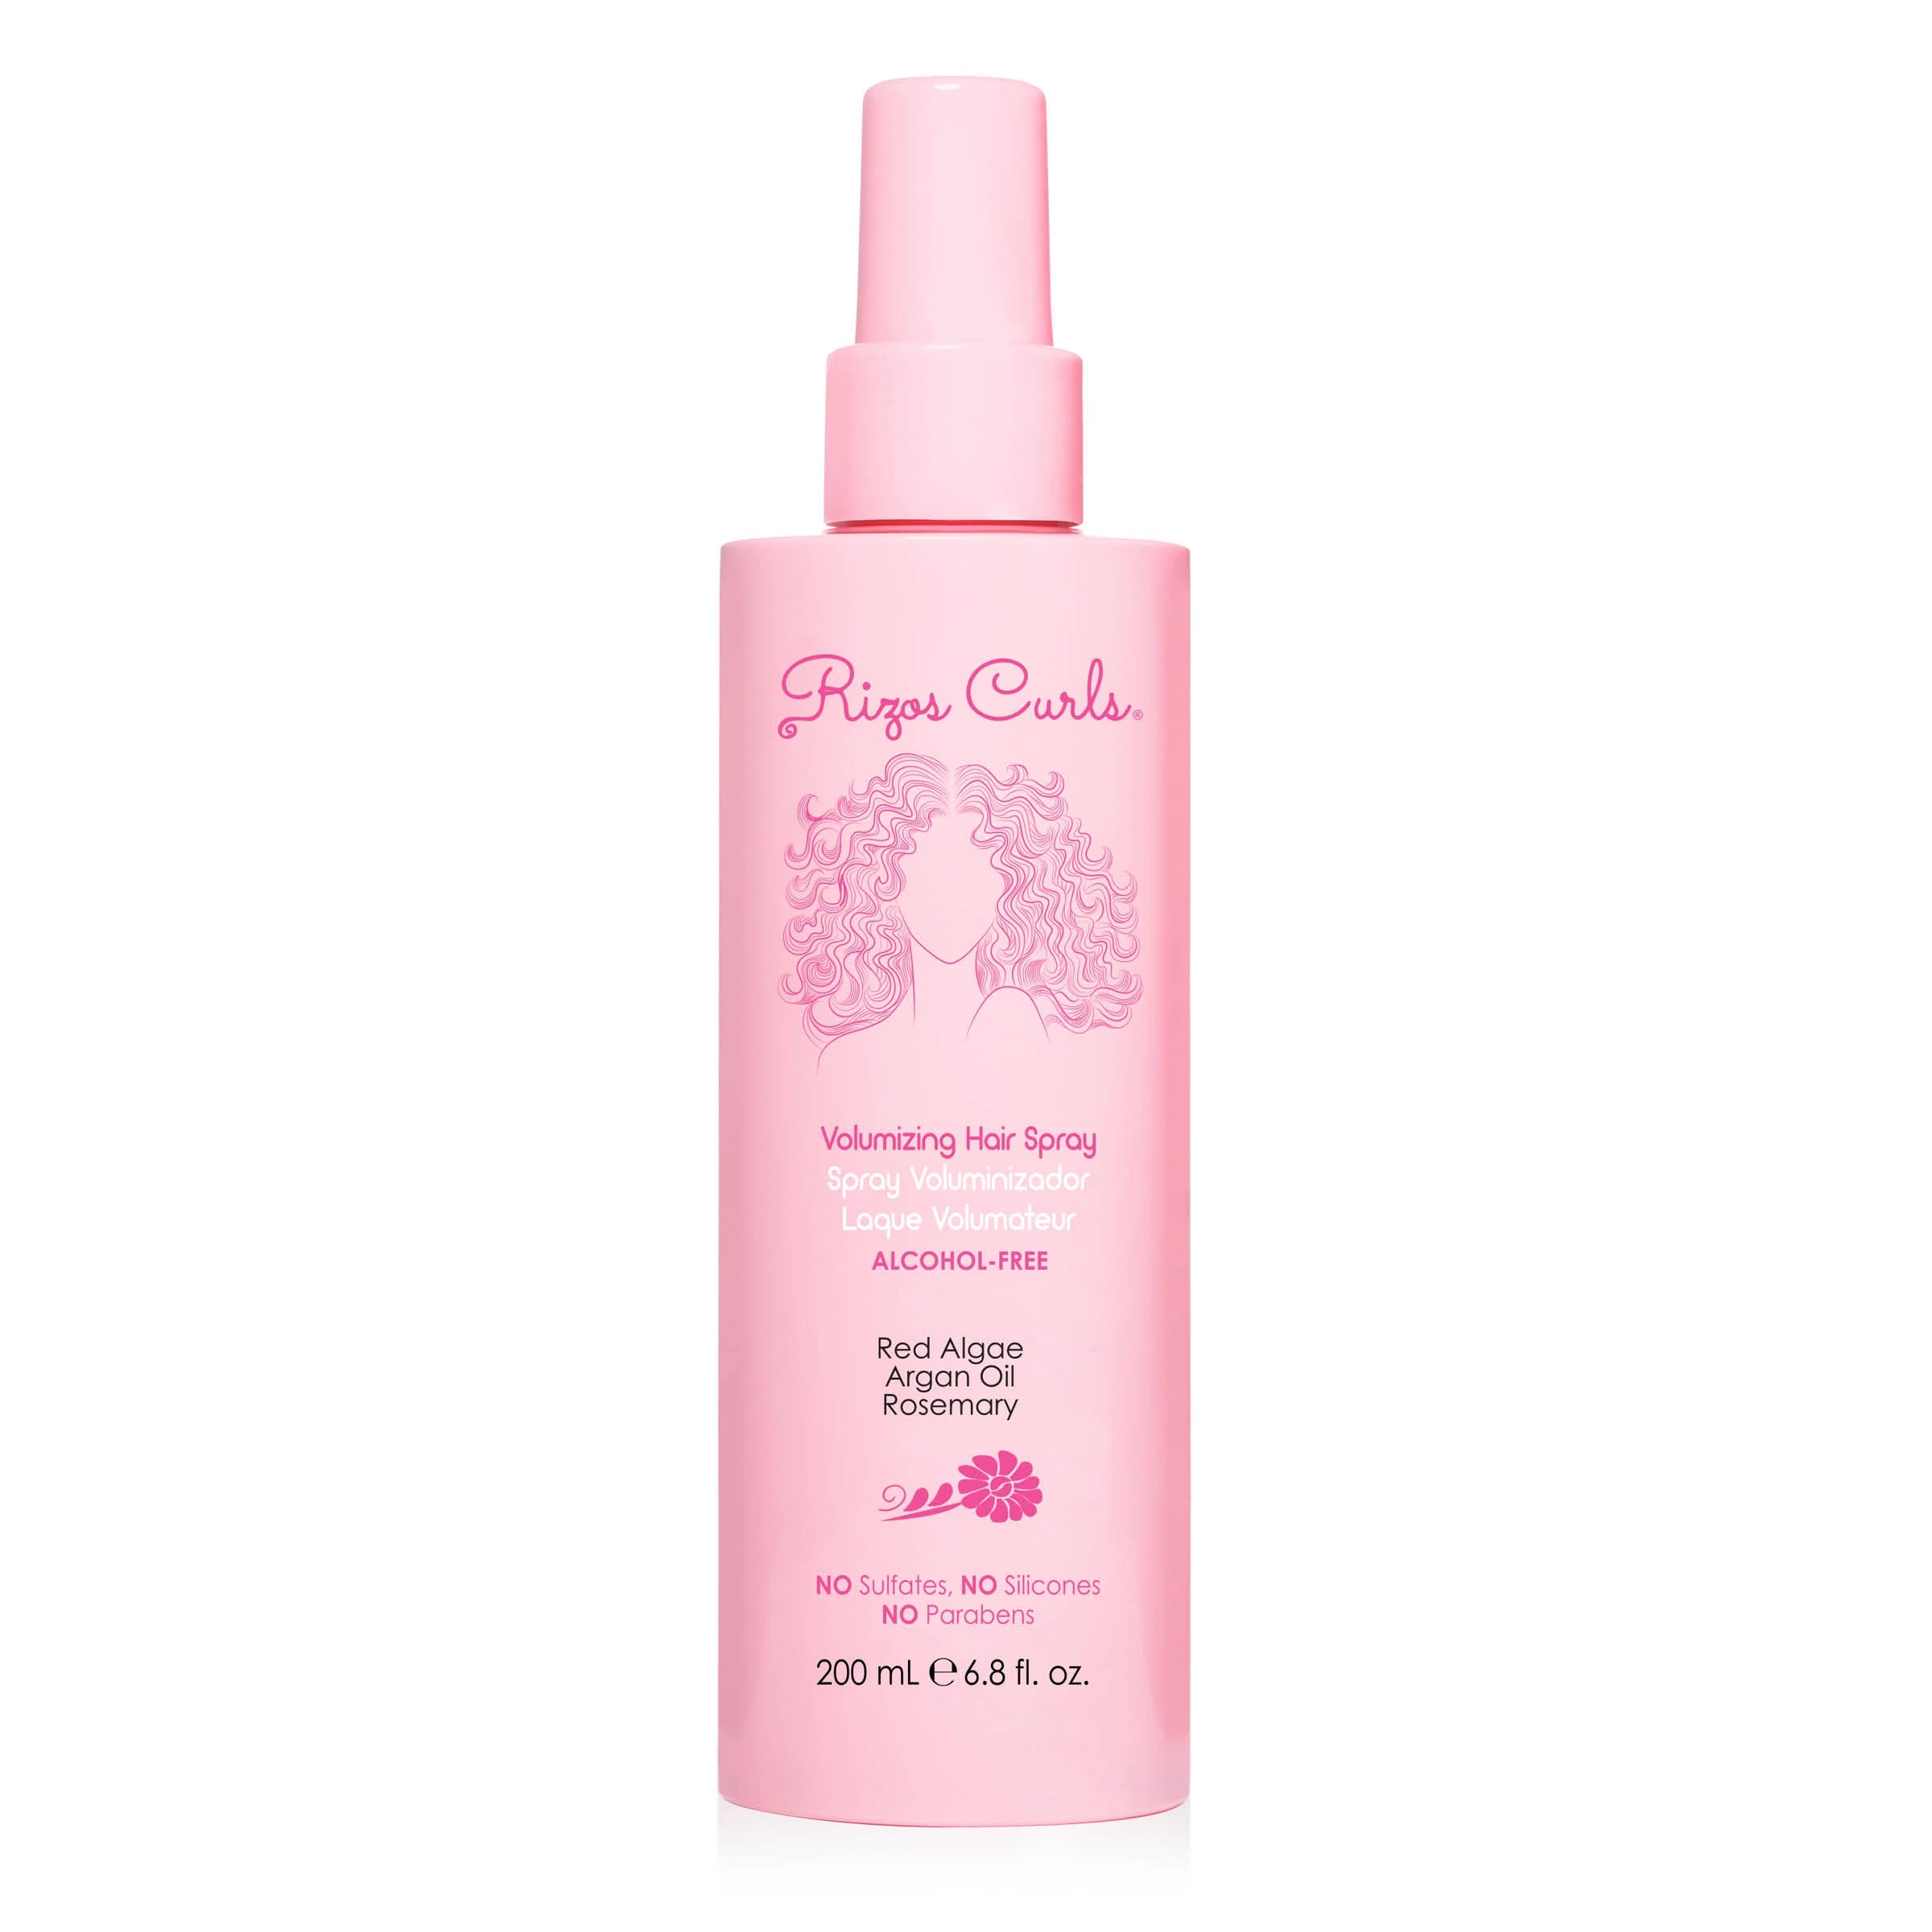 Alcohol-Free Hair Spray for Hold